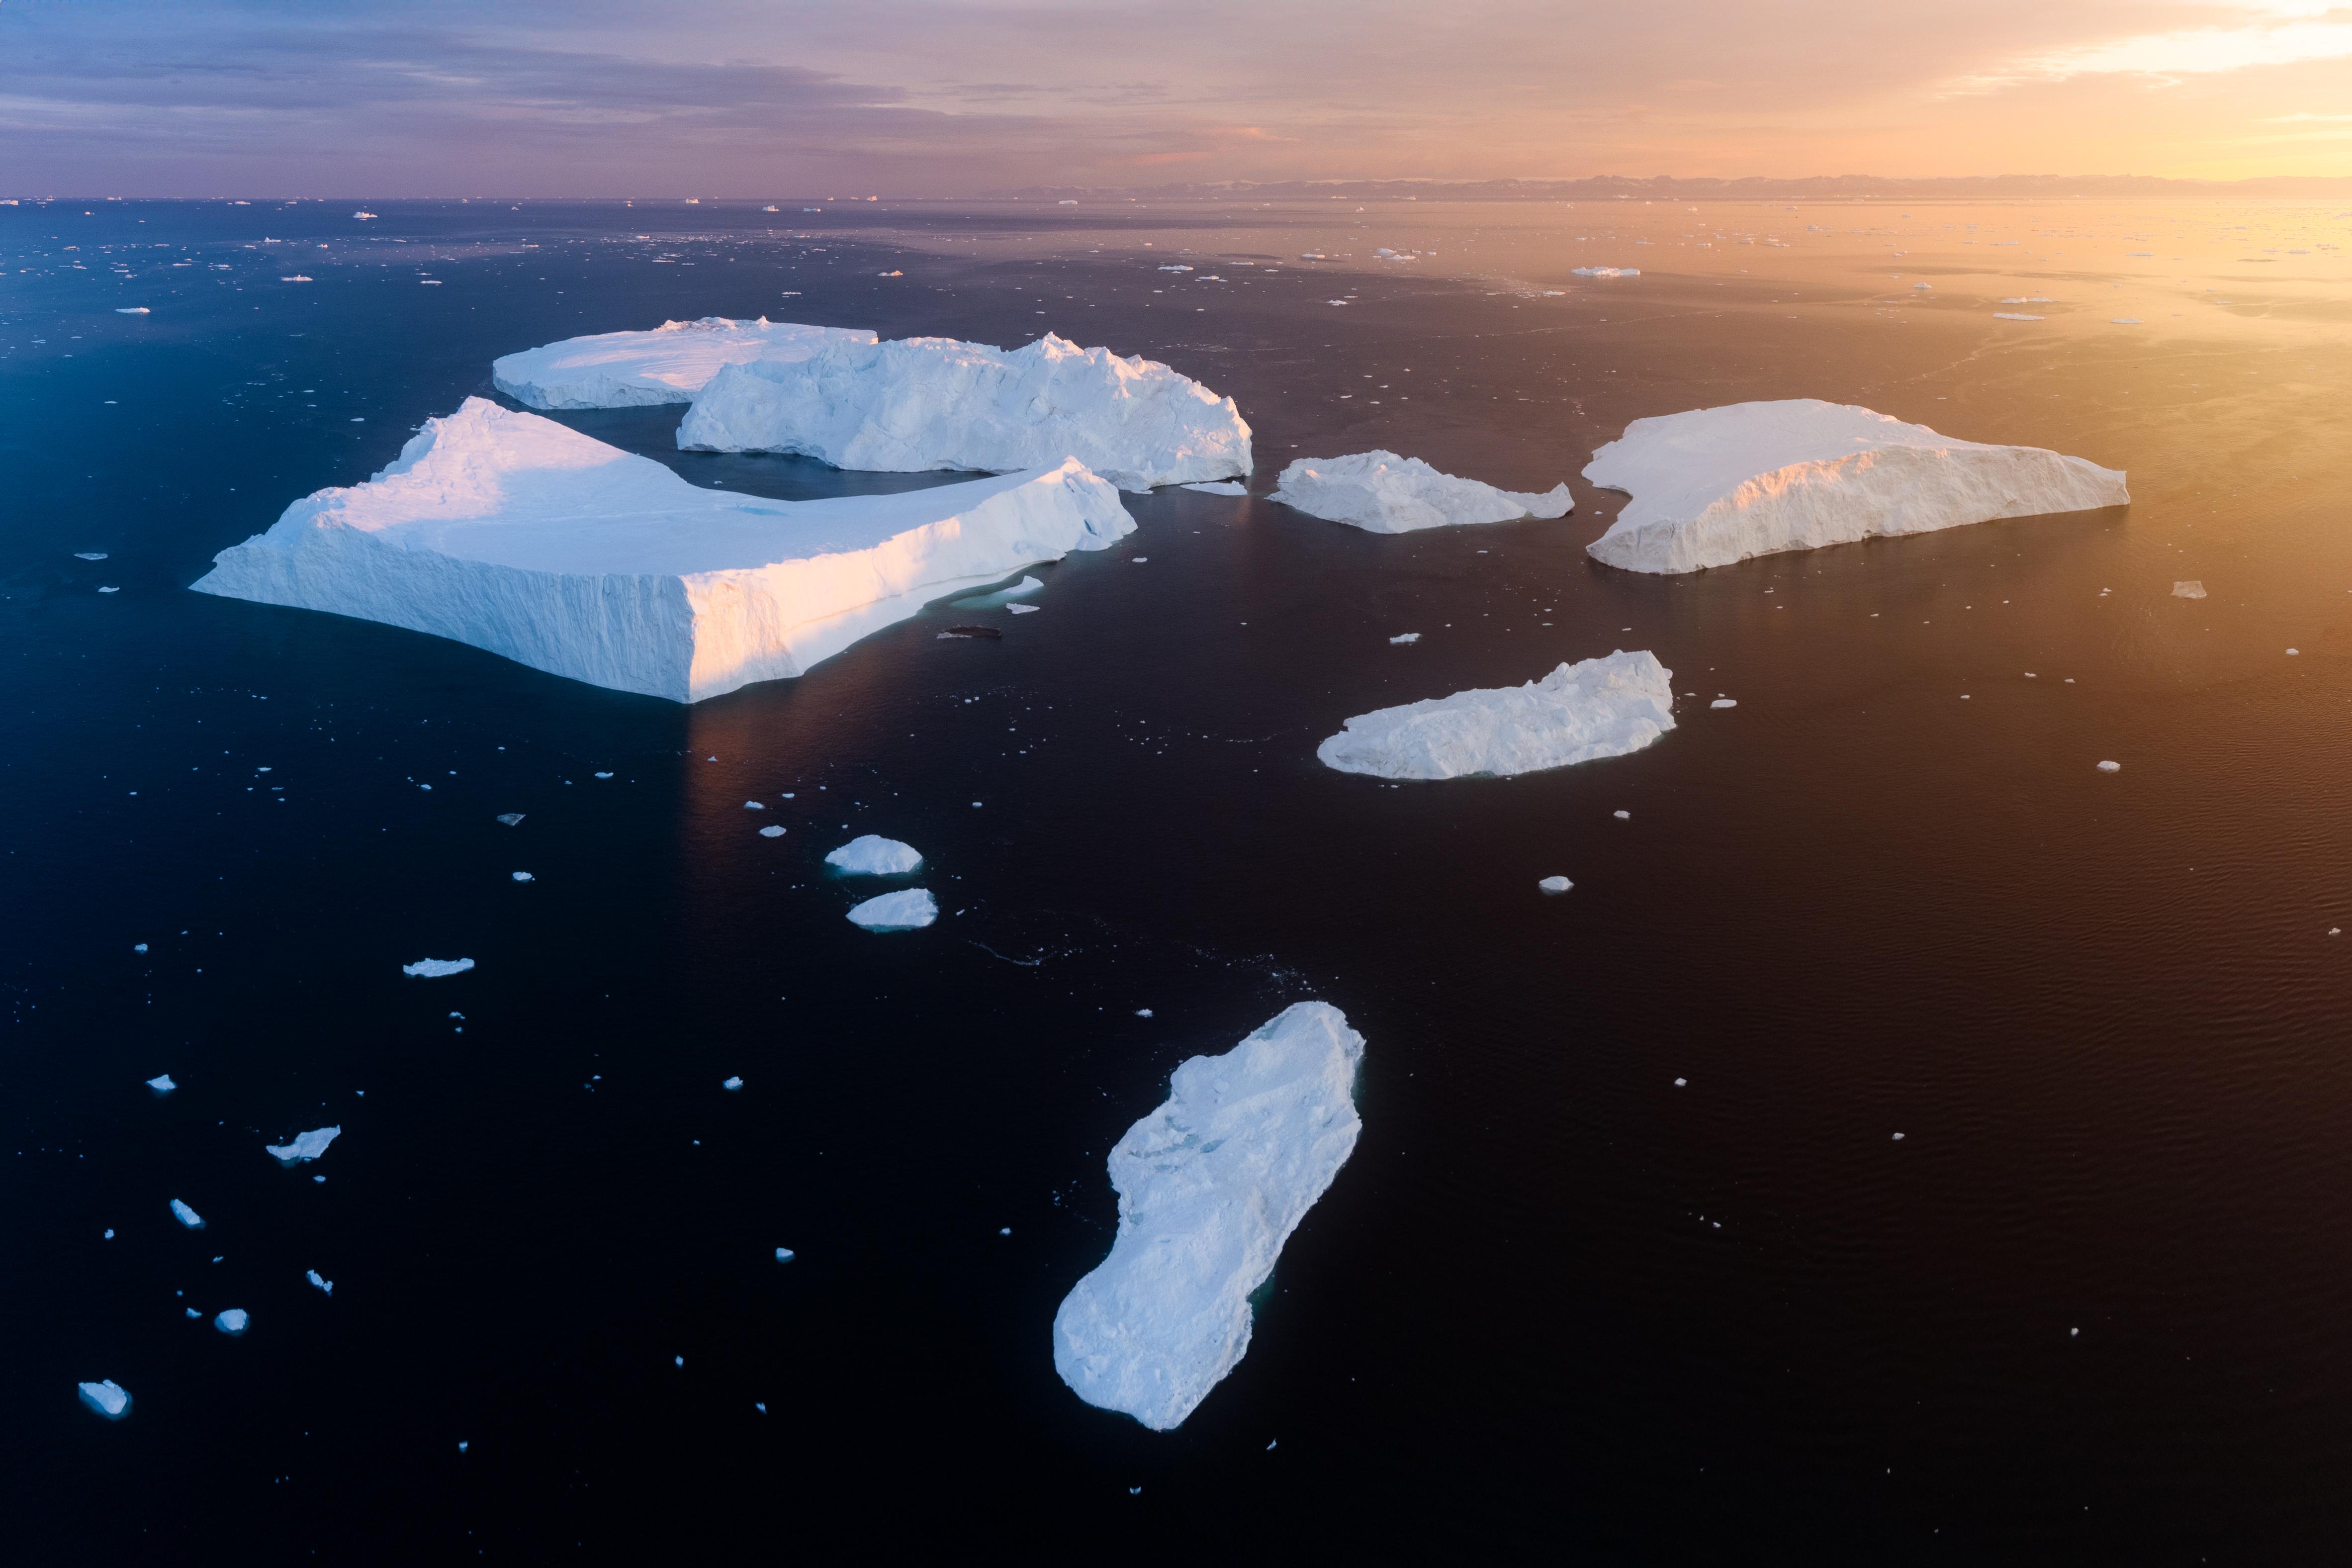 General 4730x3153 iceberg ice sea nature landscape aerial view Greenland Ilulissat Icefjord fjord sunset